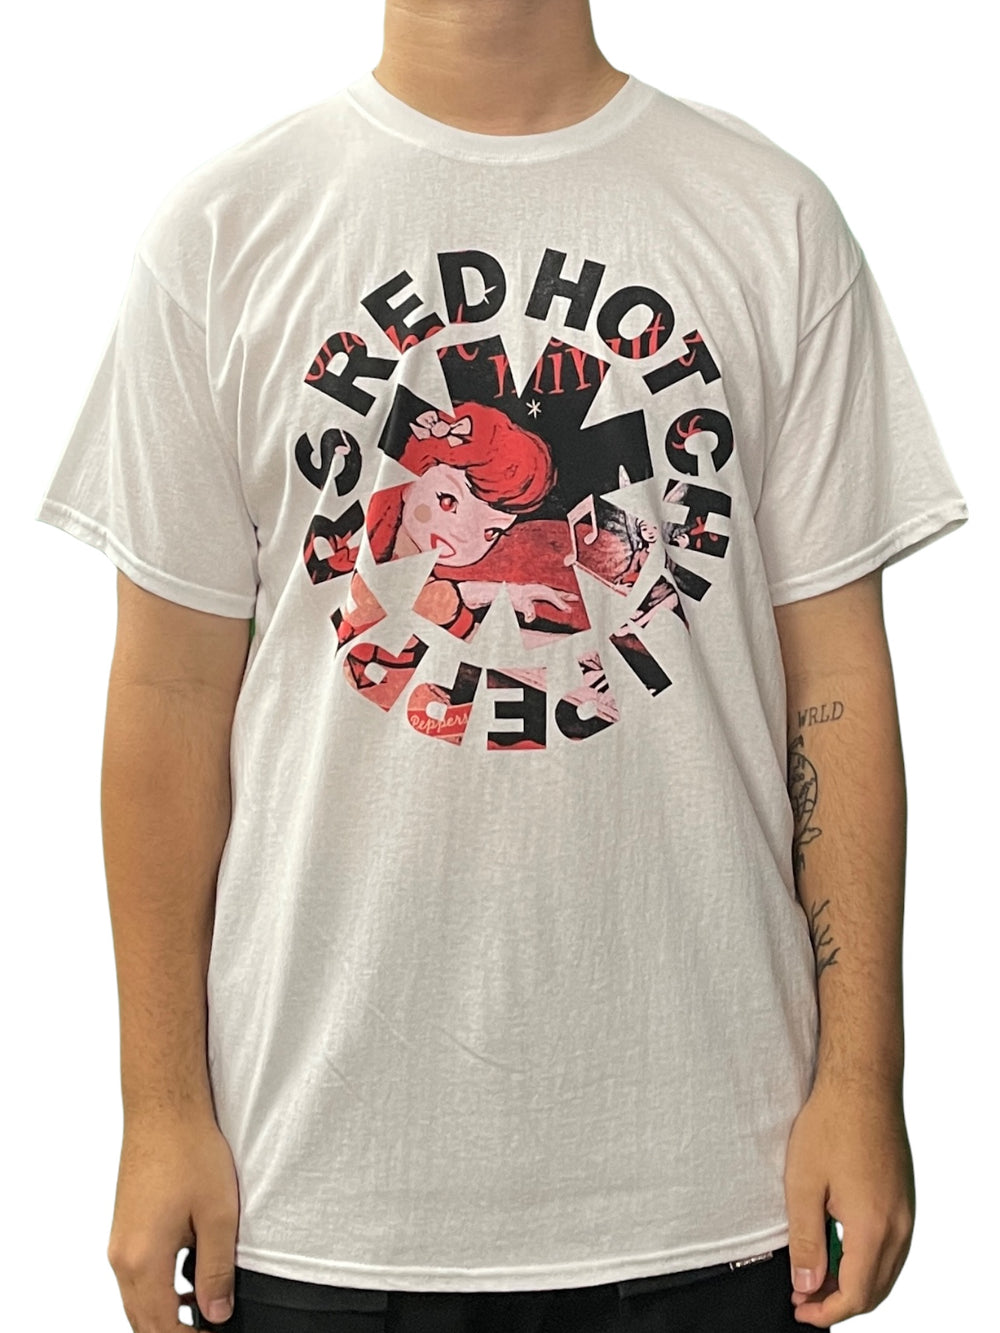 Red Hot Chilli Peppers ASTERISK GIRL White Unisex Official T Shirt Brand New Various Sizes